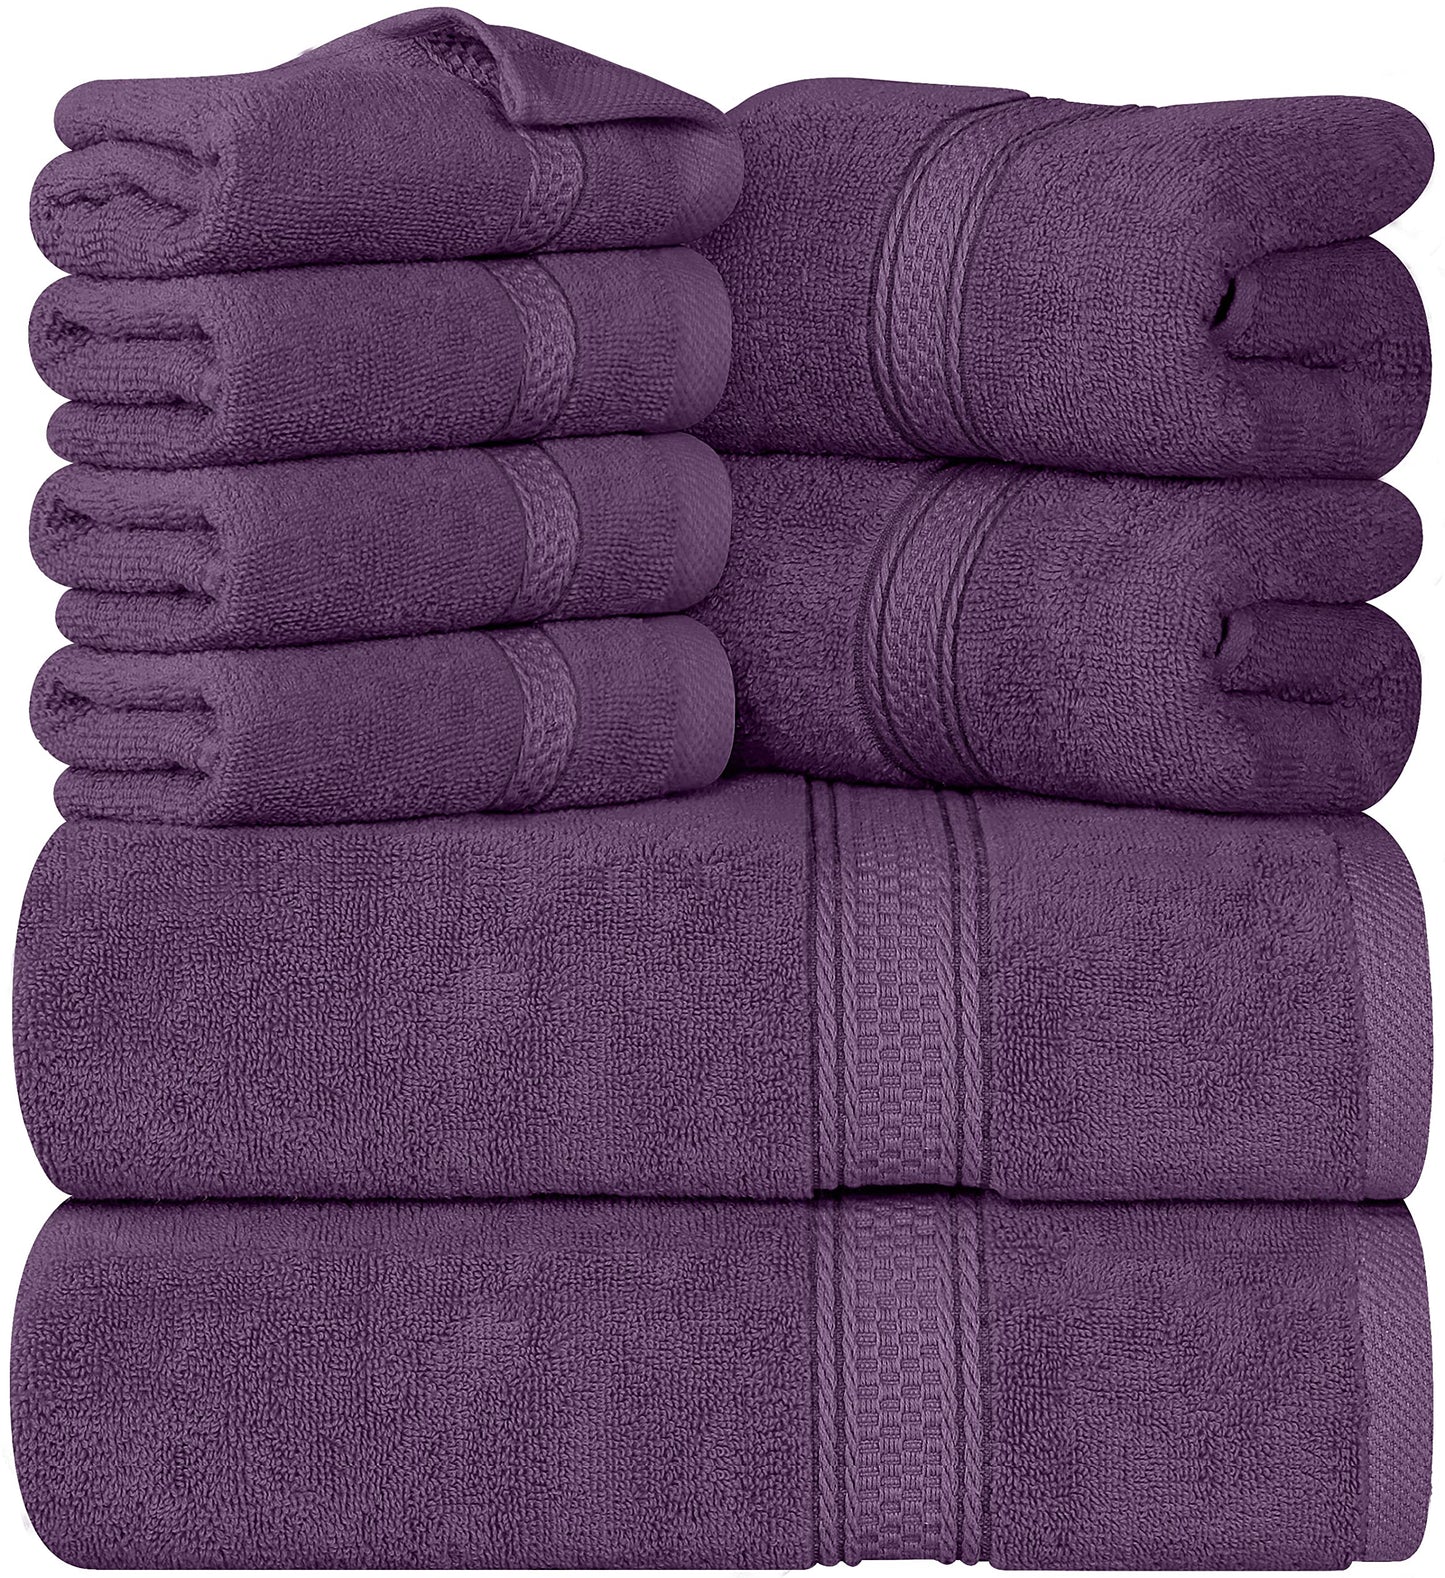 Utopia Towels 8-Piece Premium Towel Set, 2 Bath Towels, 2 Hand Towels, and 4 Wash Cloths, 600 GSM 100% Ring Spun Cotton Highly Absorbent Towels for Bathroom, Gym, Hotel, and Spa (Plum)